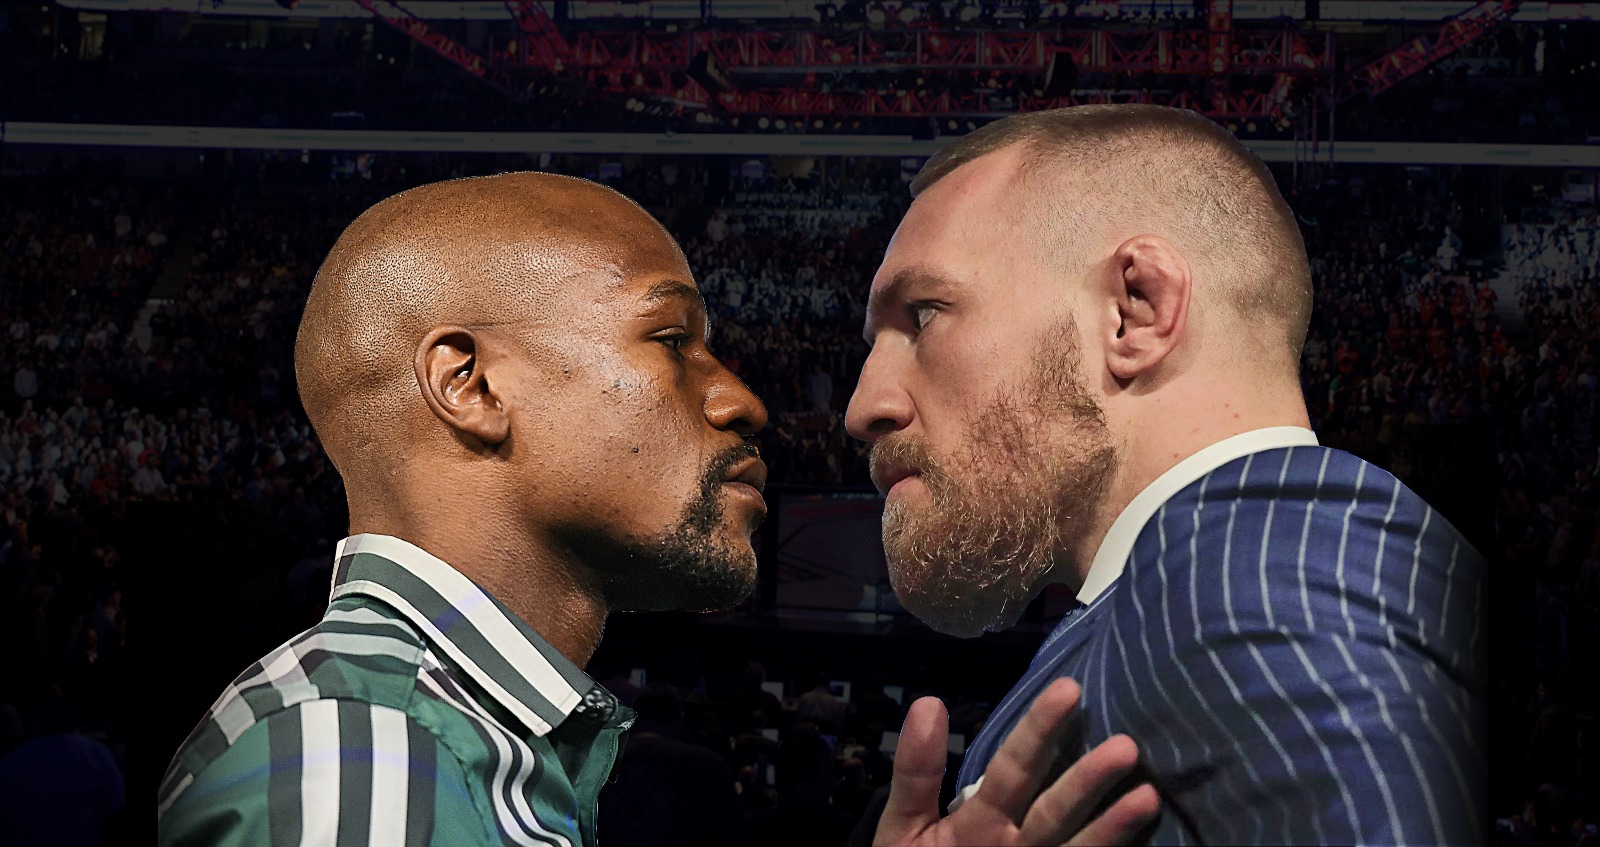 Book Reservations to Vegas Now For The Biggest Fight In History